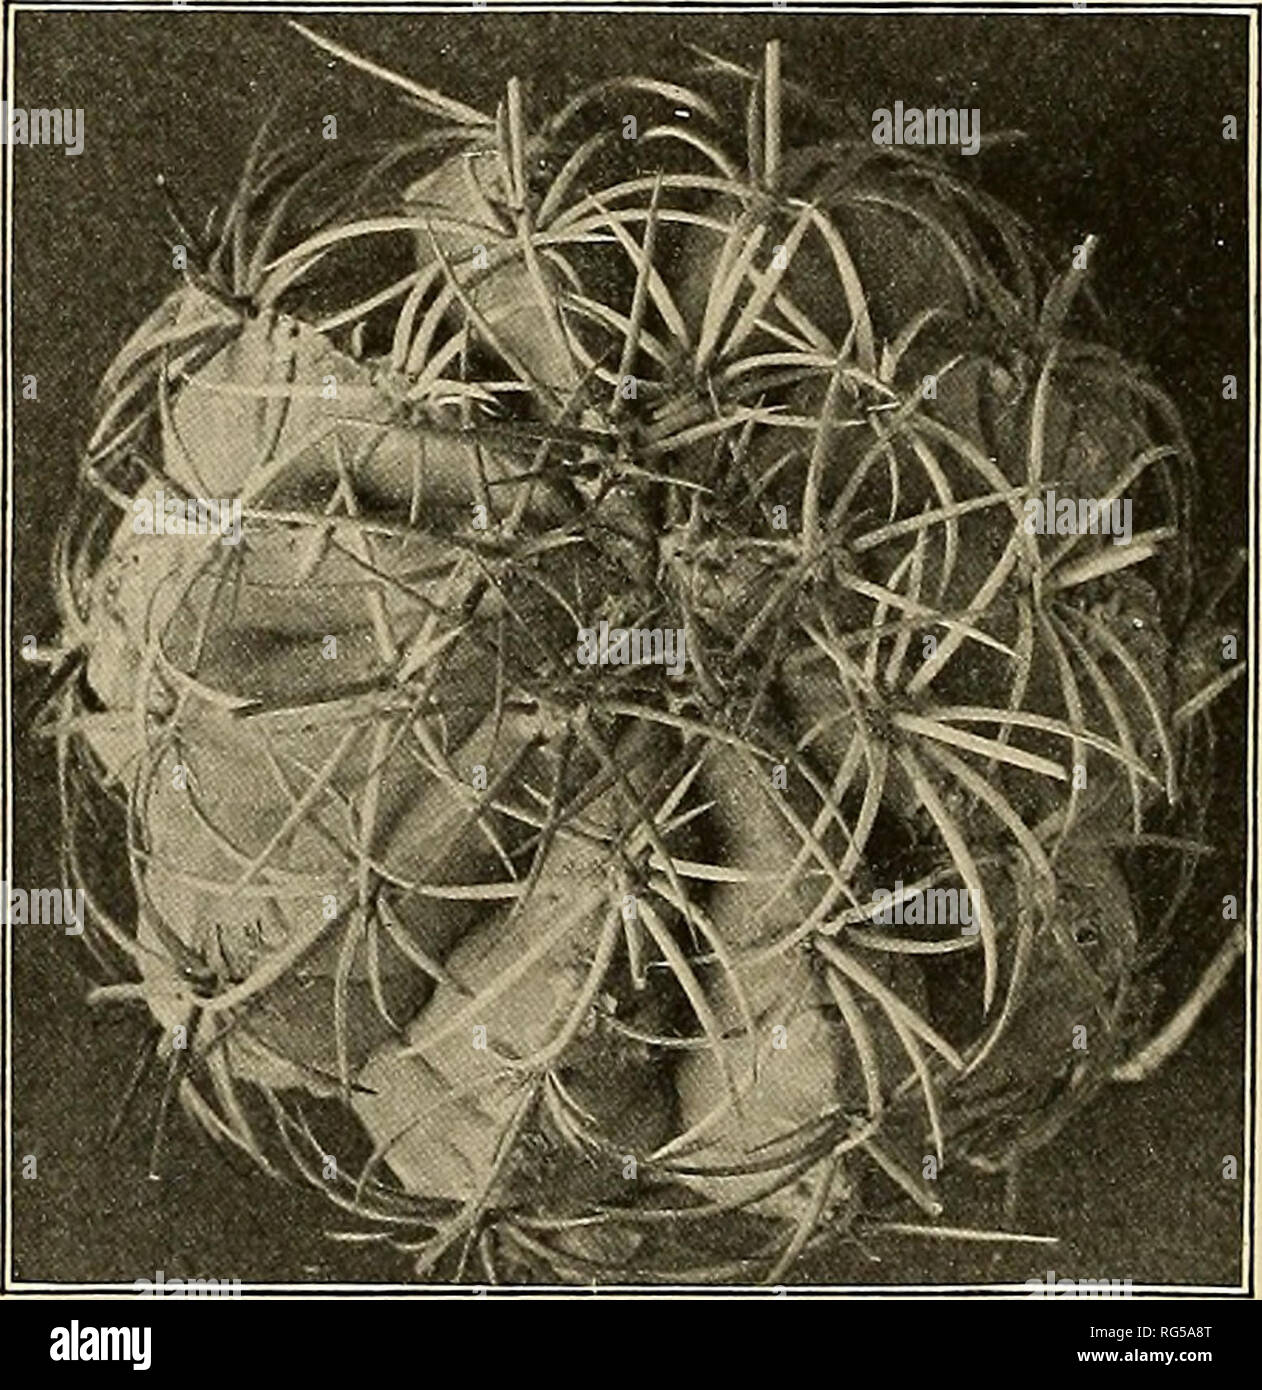 . The Cactaceae : descriptions and illustrations of plants of the cactus family. . Fig. 248.—Cactus zehntneri. Fig. 249.—Cactus sp. 18. Cactus neryi (Schumann). Melocactus neryi Schumann, Monatsschr. Kakteenk. 11: 168. 1901. More or less depressed, 10 to 11 cm. high, 13 to 14 cm. in diameter, crowned by a small cephalium a little broader than high; ribs 10, broad and low; radial spines 7 to 9, terete, spreading outward, 2.5 cm. long; flowers 2.2 cm. long; stigma-lobes greenish; fruit clavate, red. Type locality: Araca-Fluss, Brazil. Distribution: State of Amazonas, Brazil. The plant is known t Stock Photo